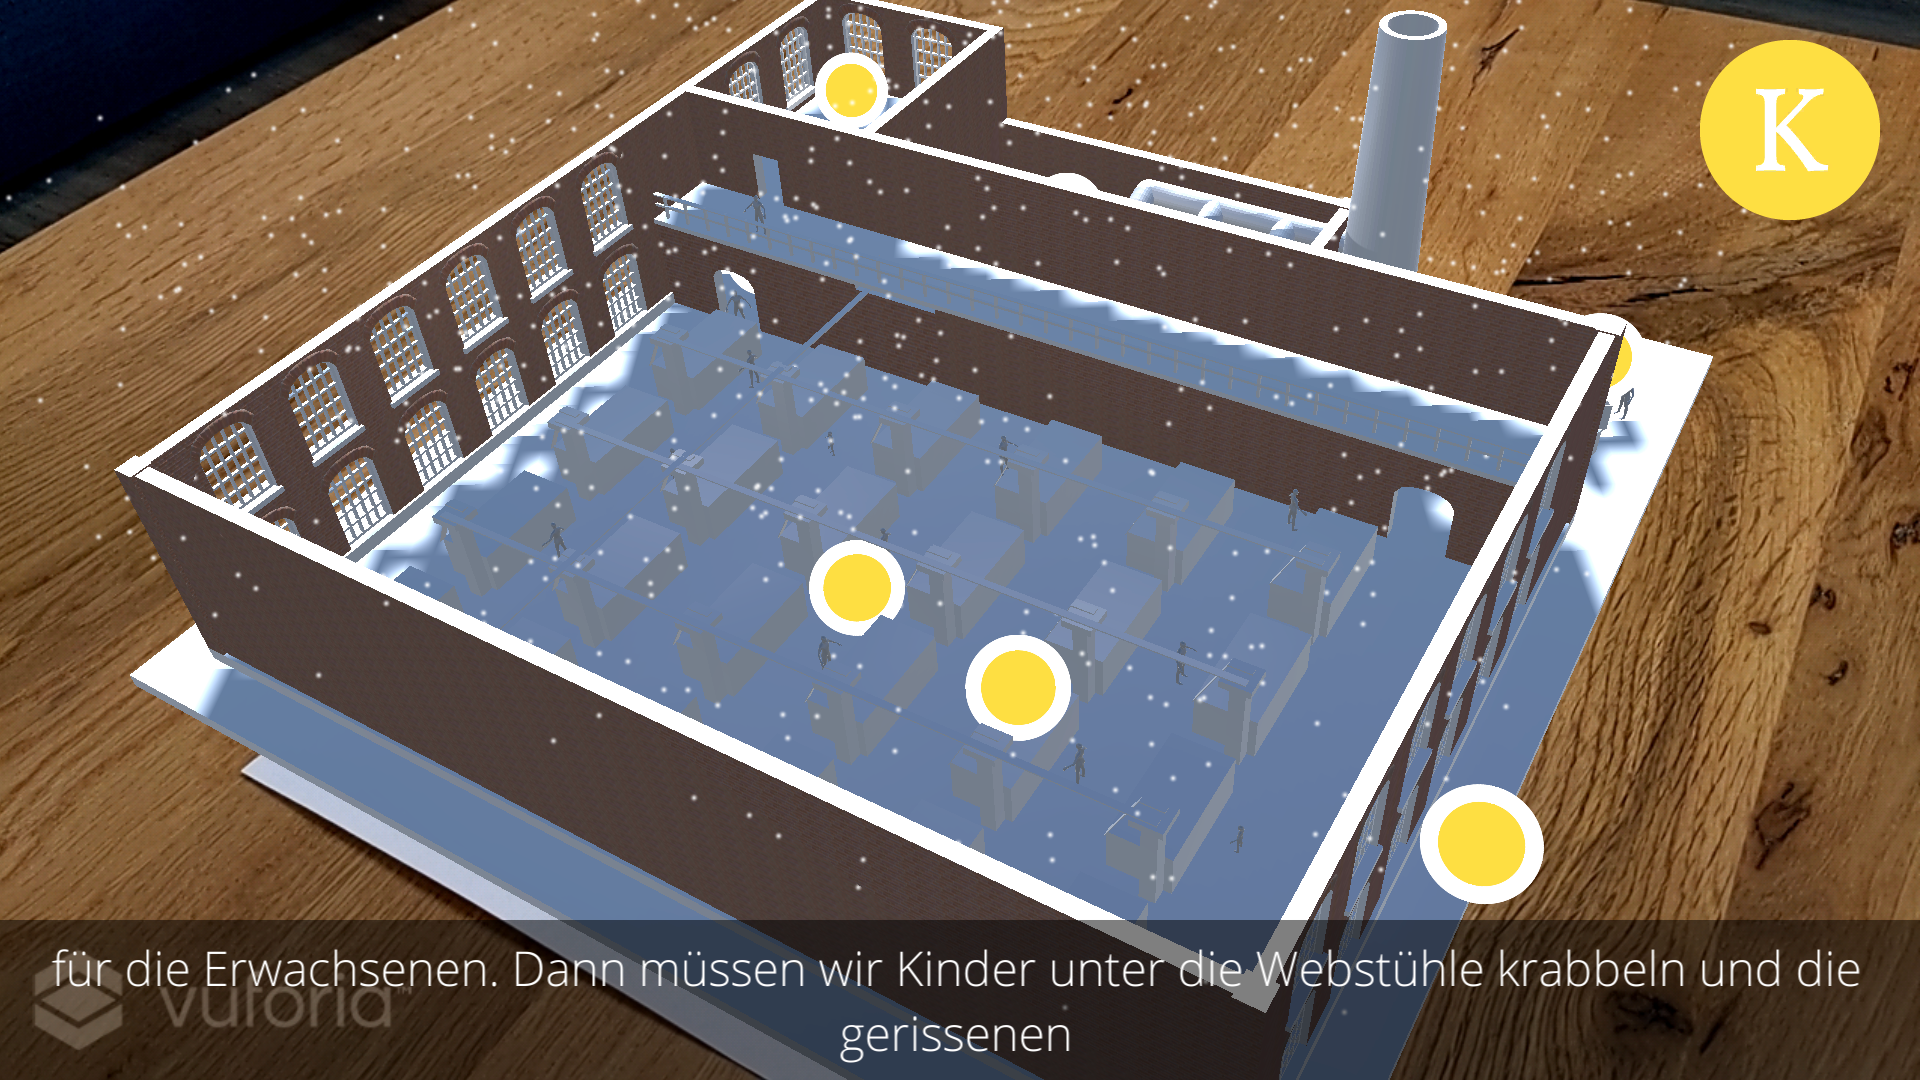 Screenshot of yARn that shows a 3D rendered factory projected on a wooden table from the perspective of the child. There are several yellow colored points of interest inside the factory. At the bottom of the screen subtitles are displayed.